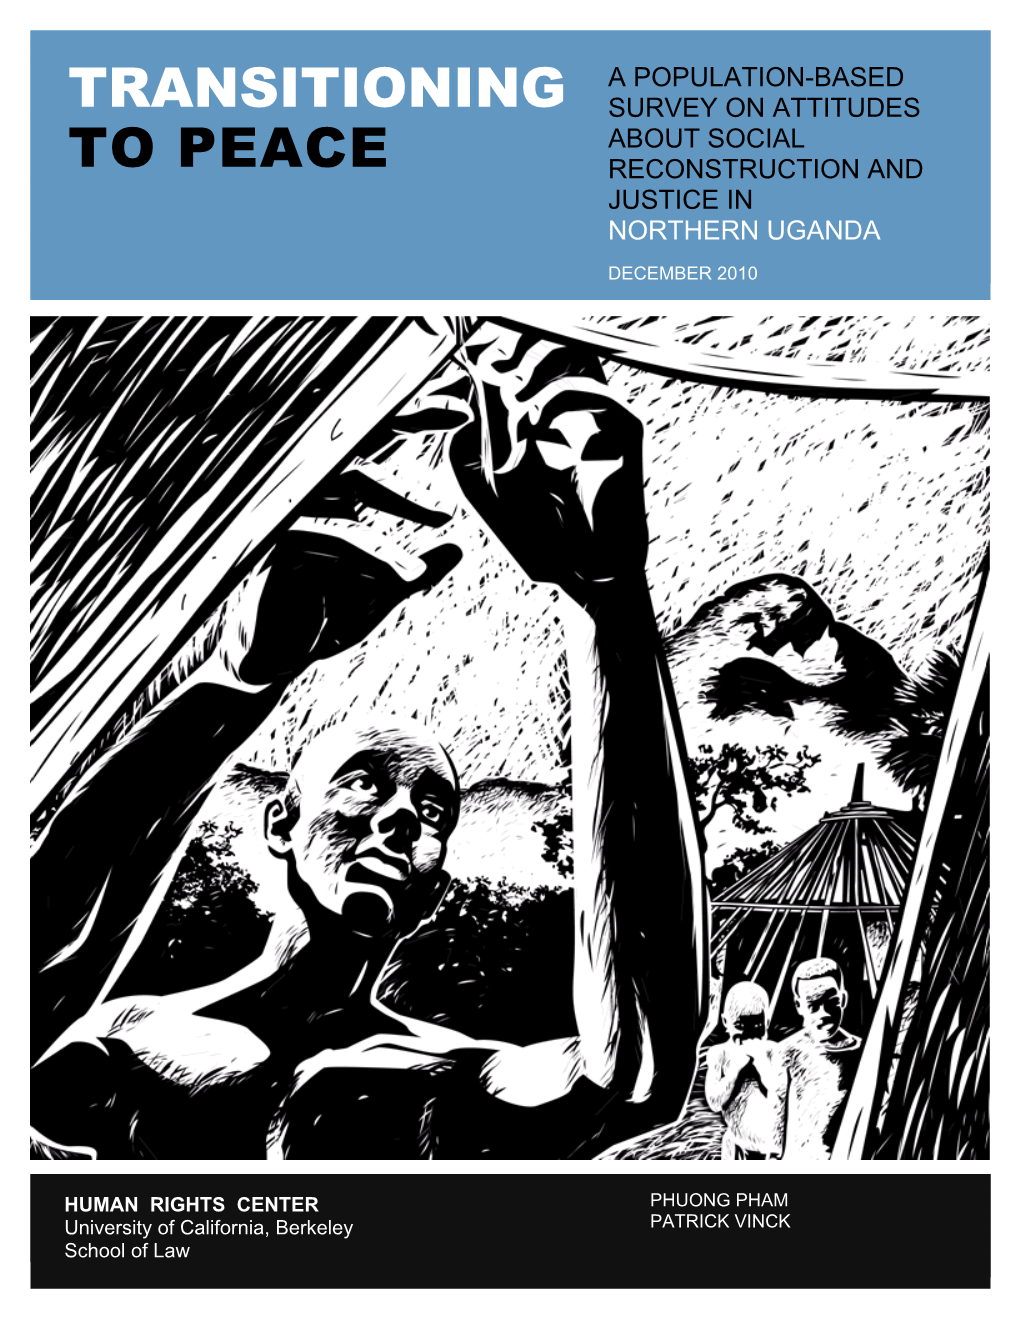 Transitioning to Peace: a Population-Based Survey on Attitudes About Social Reconstruction and Justice in Northern Uganda